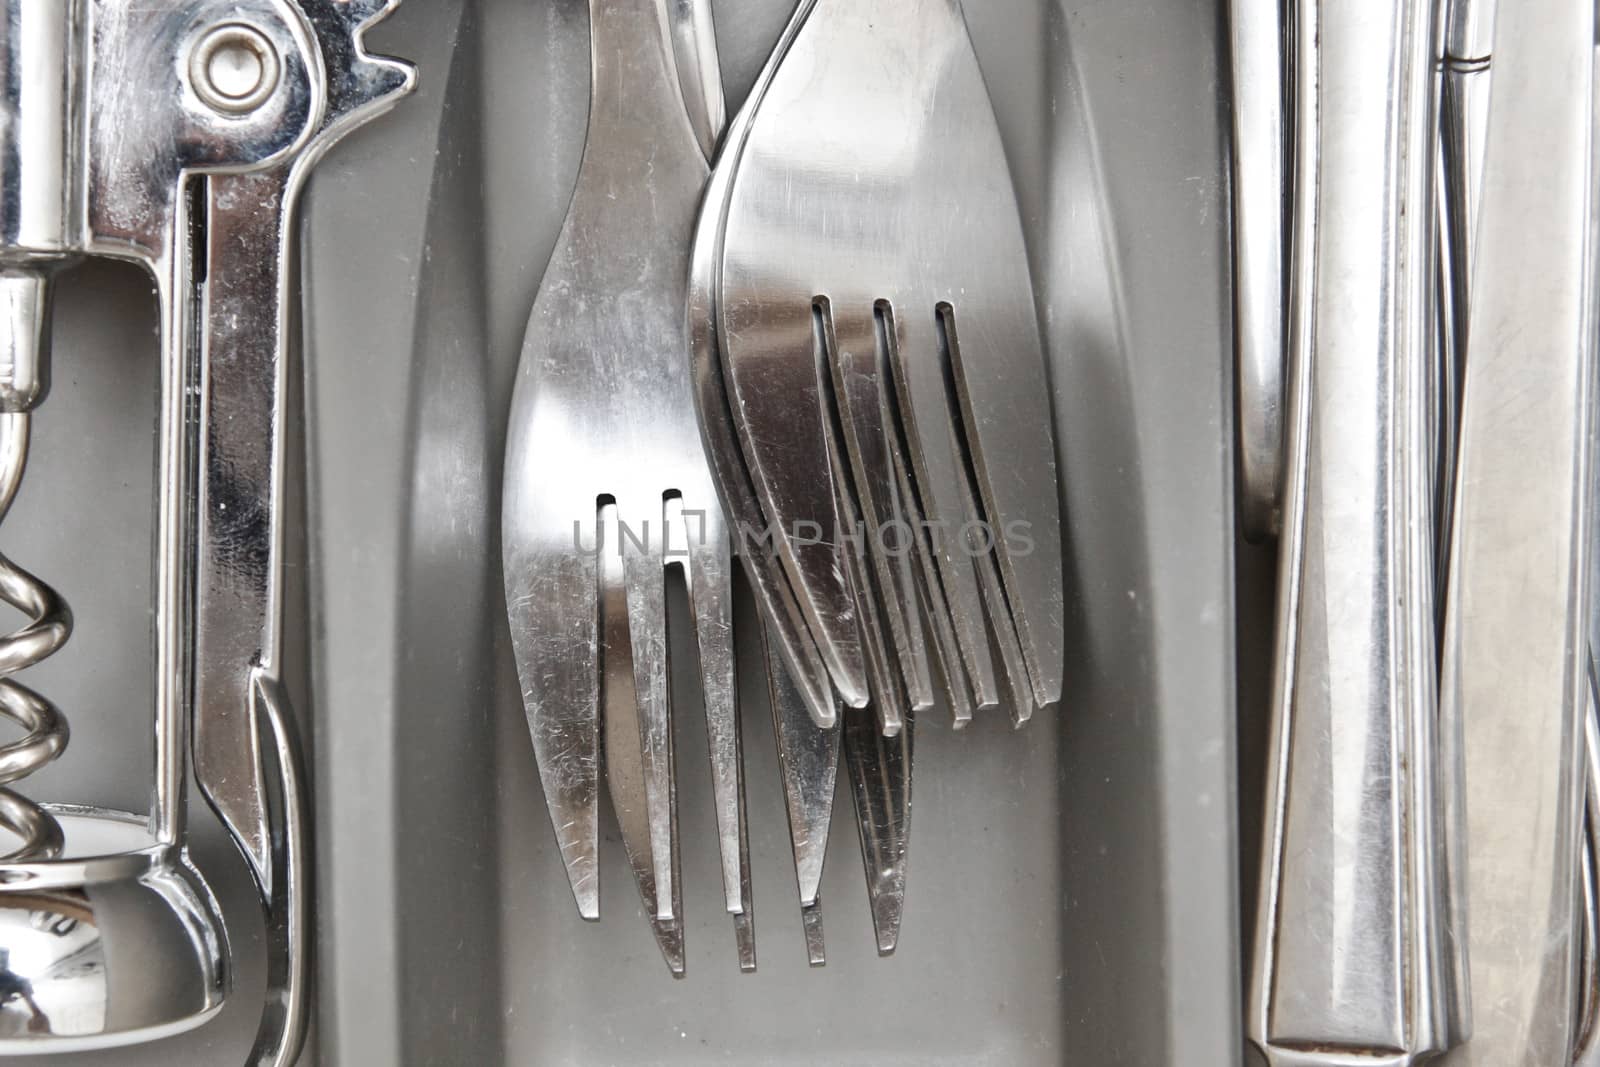 Close up of stainless steel forks in a drawer